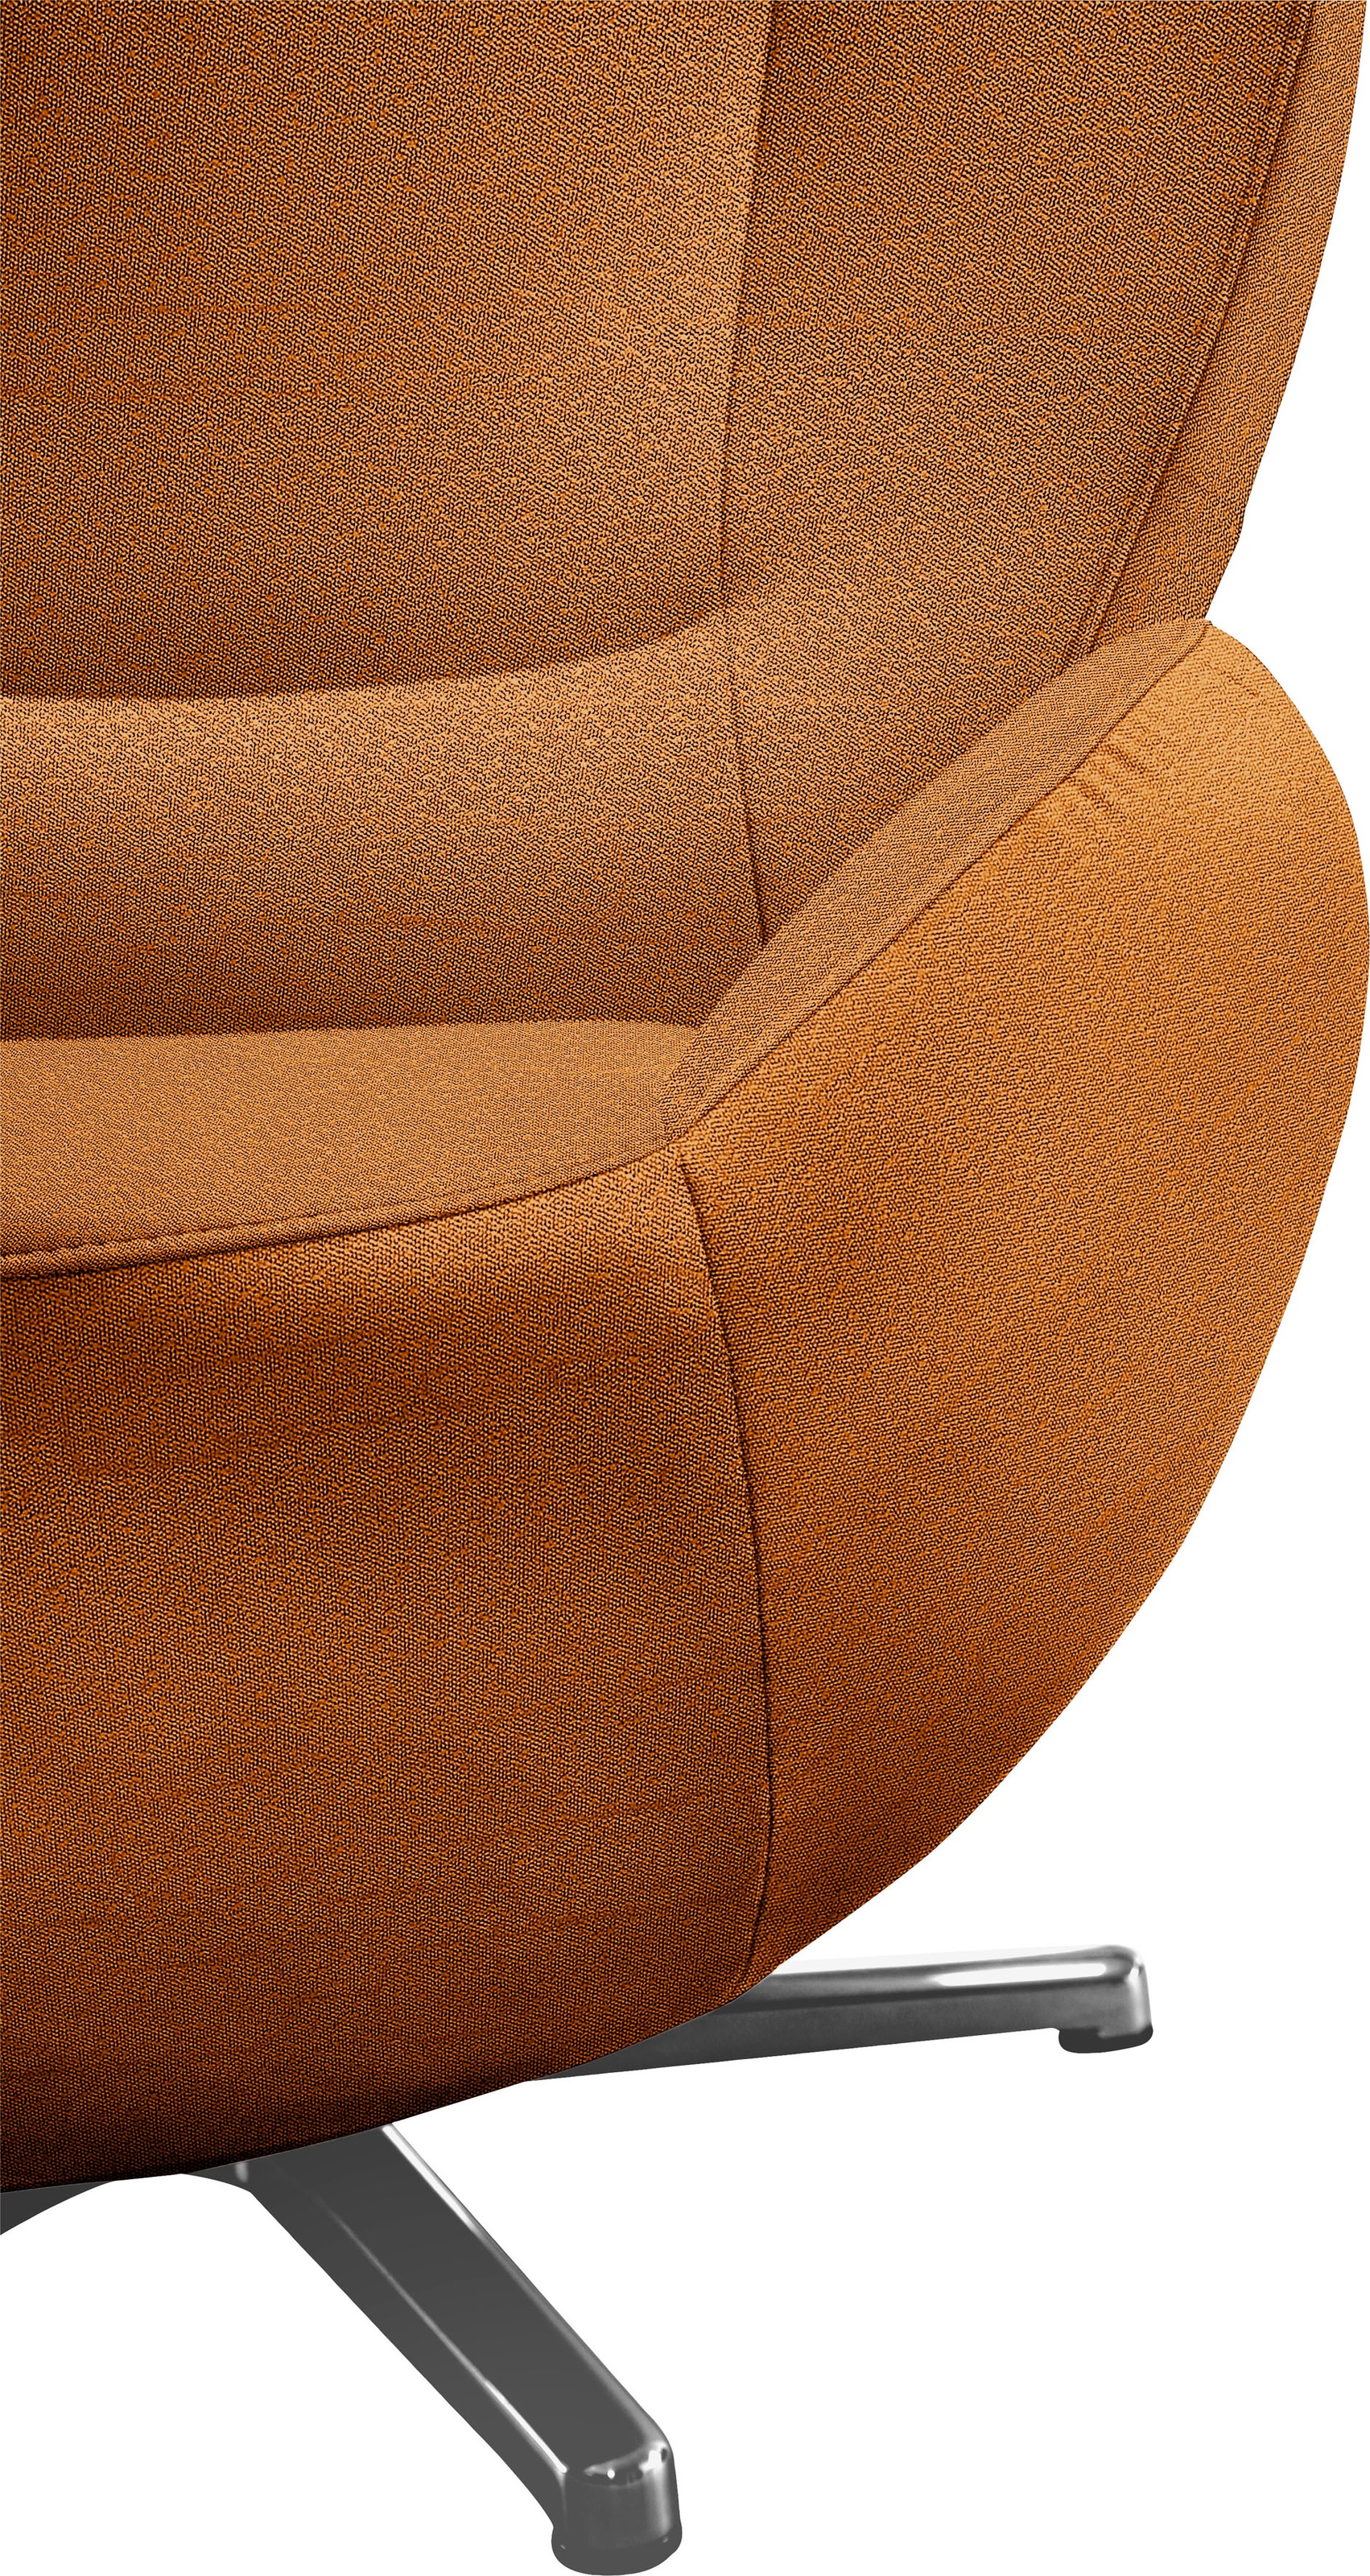 TOM TAILOR BAUR mit in »TOM | HOME Metall-Drehfuß Loungesessel PURE«, Chrom